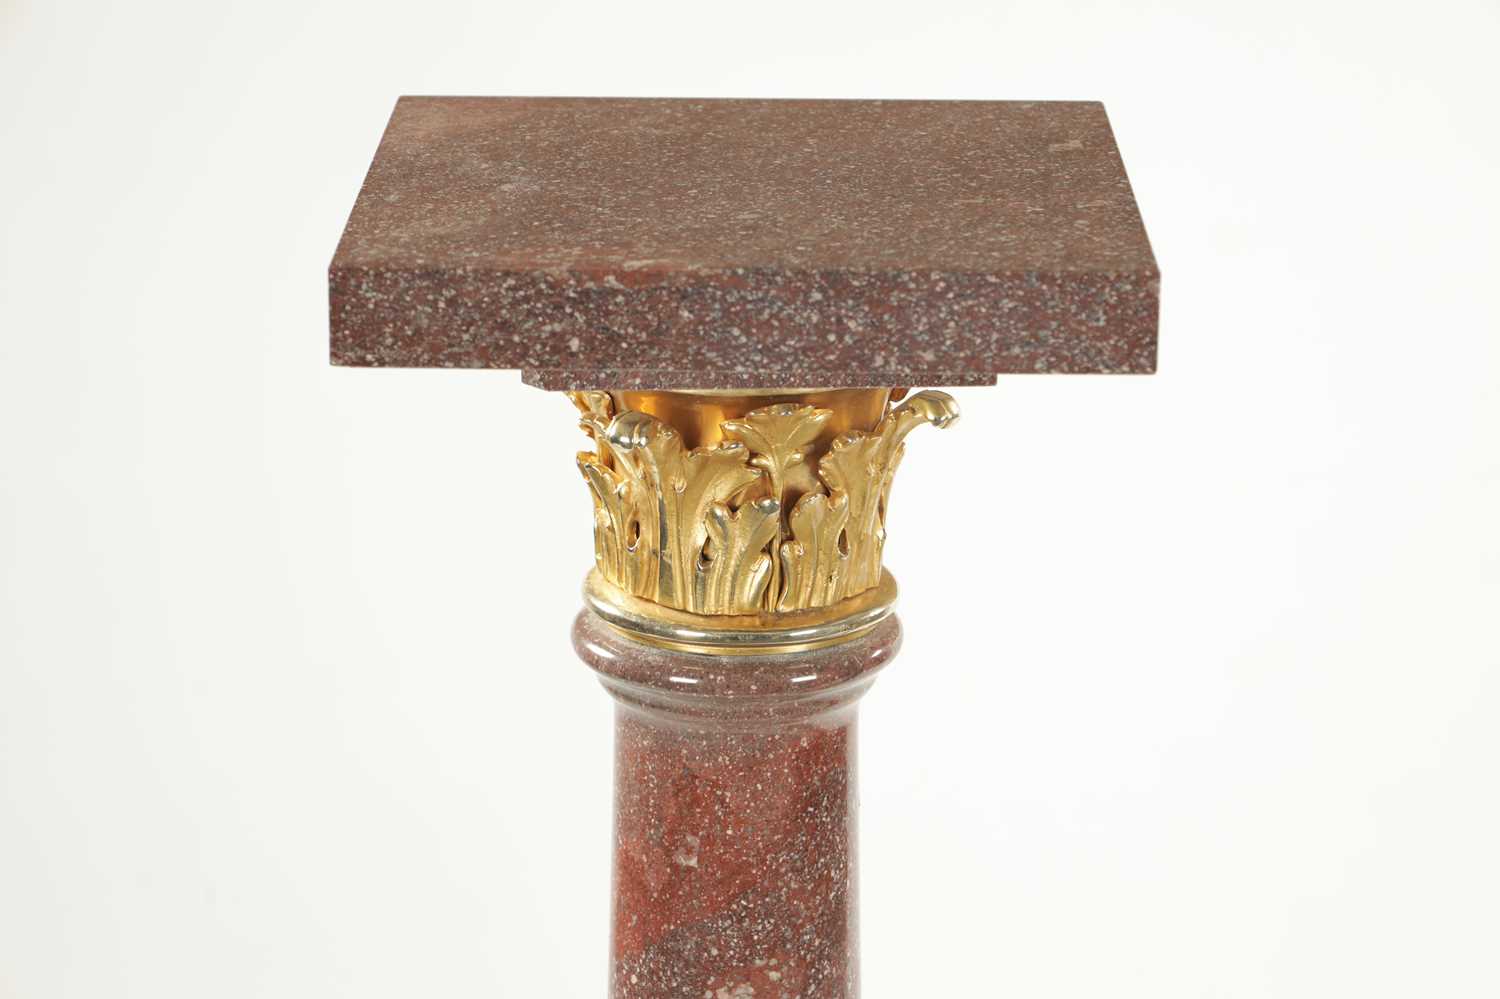 A PAIR OF 20TH CENTURY PORPHYRY TYPE AND ORMOLU MOUNTED COLUMNS - Image 4 of 7